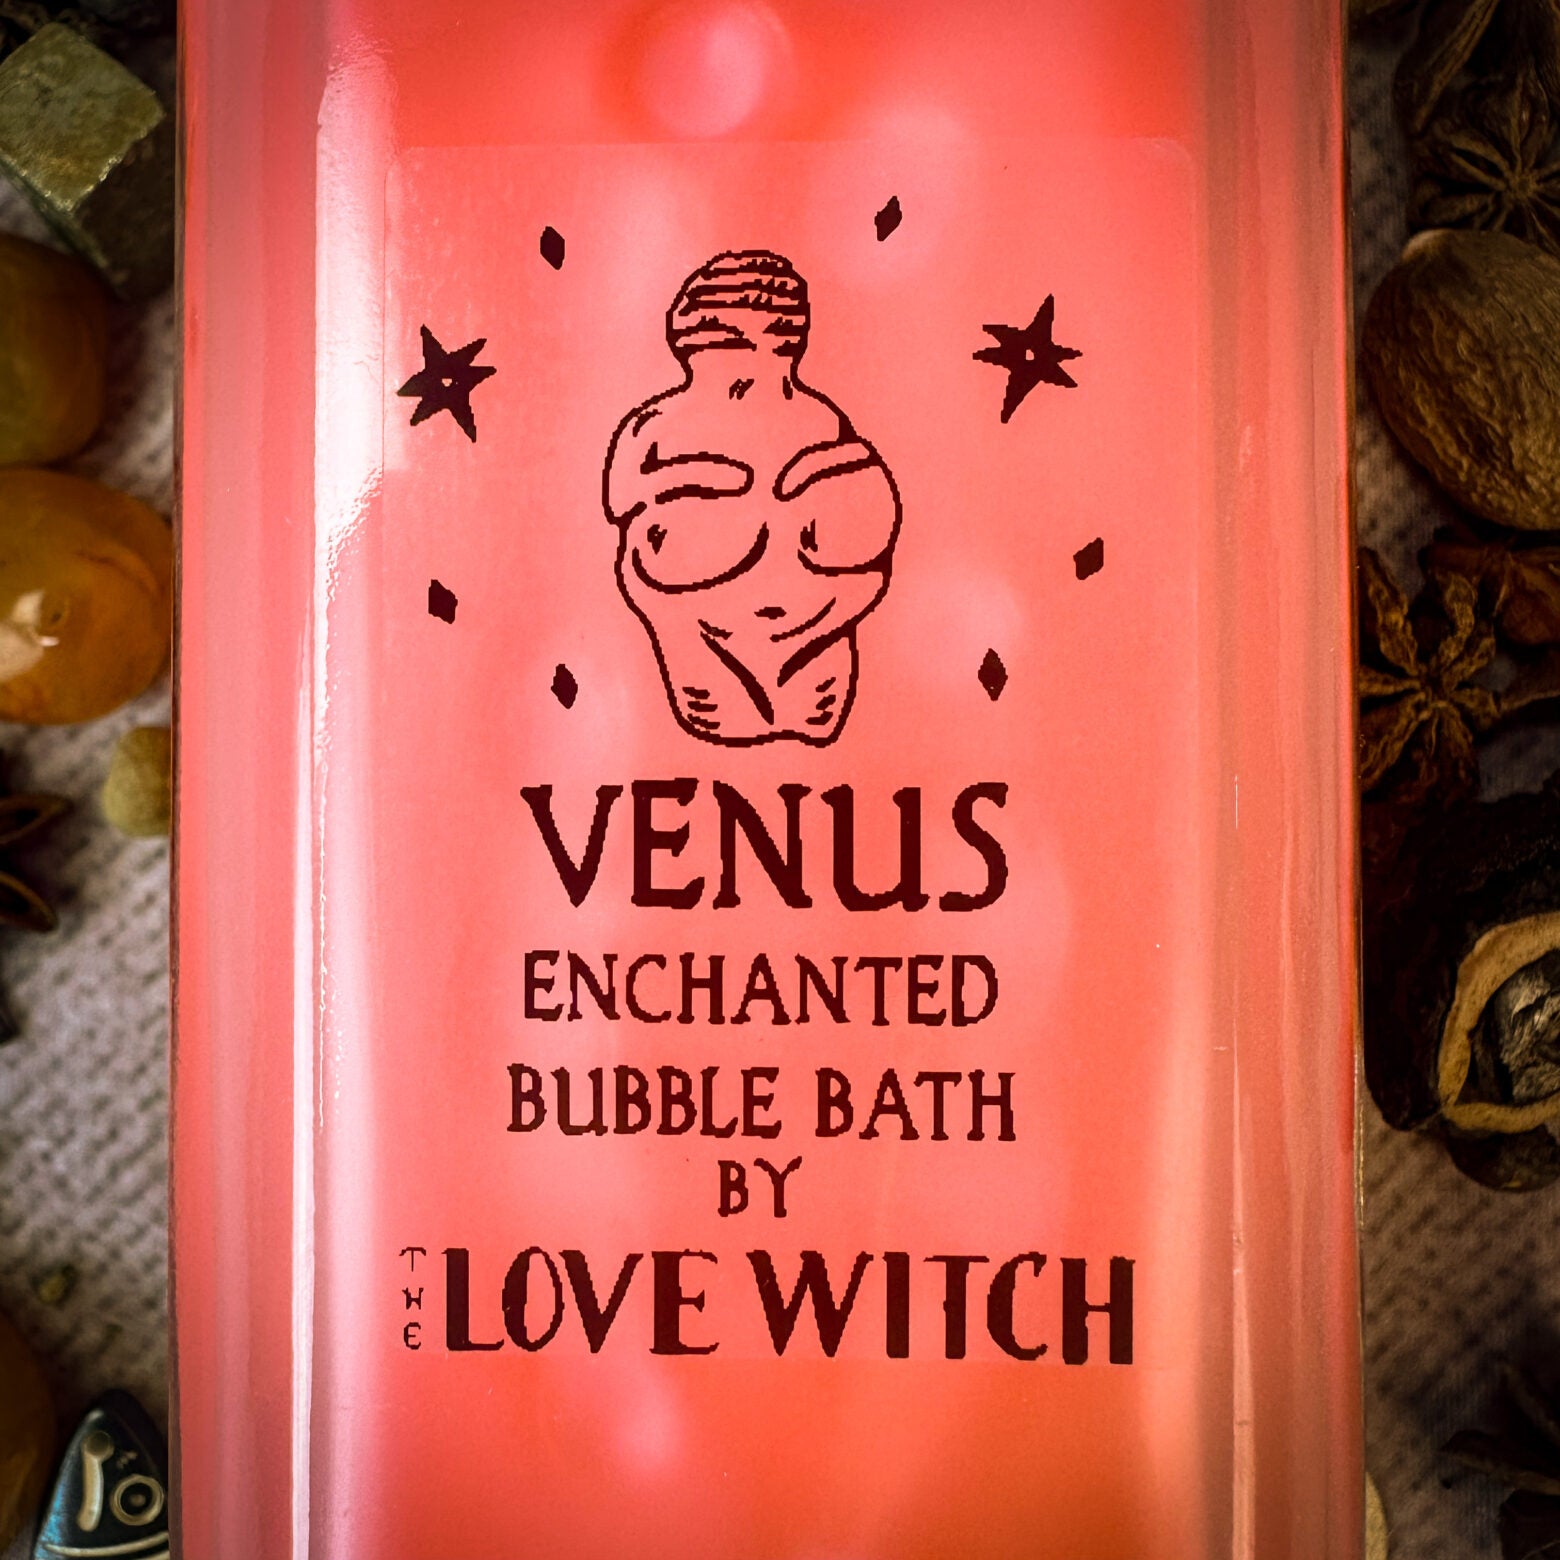 Venus Enchanted Bubble Bath by The Love Witch